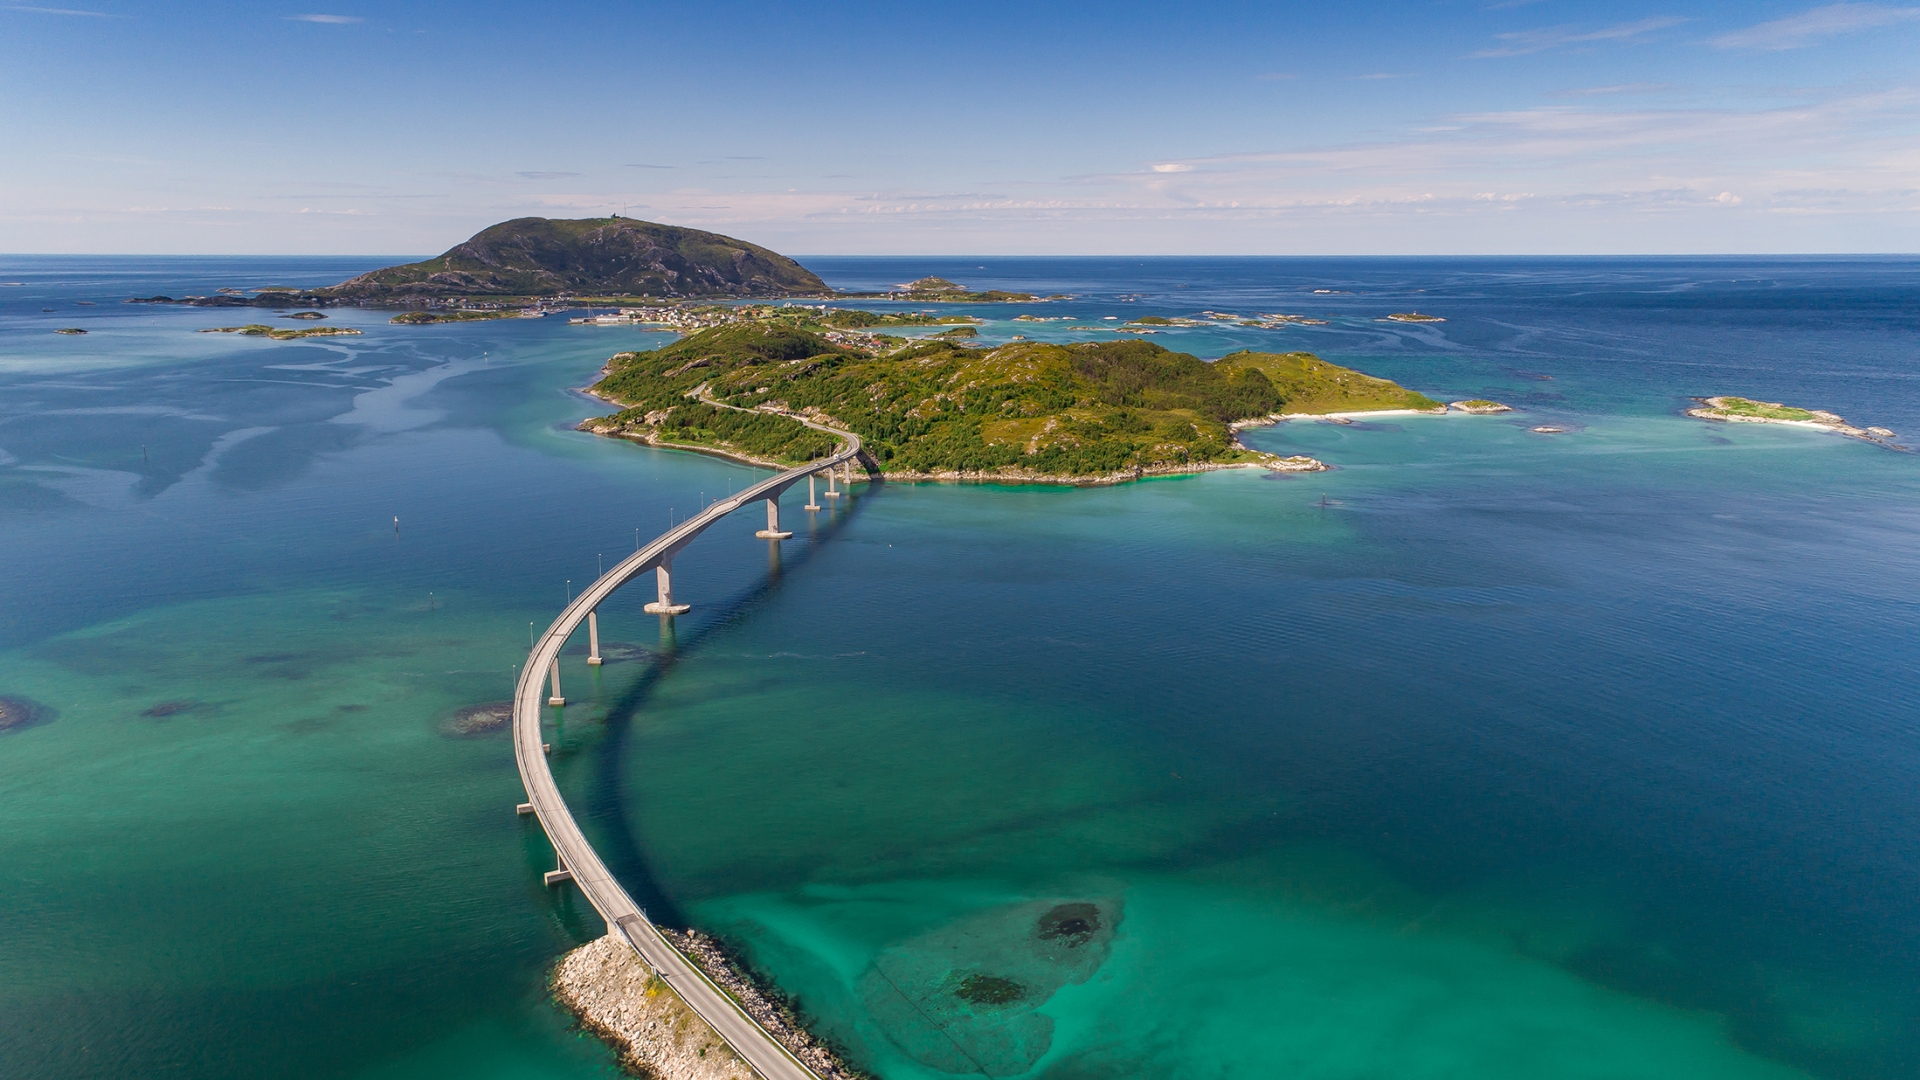 Views over the bridge and Sommarøy Island